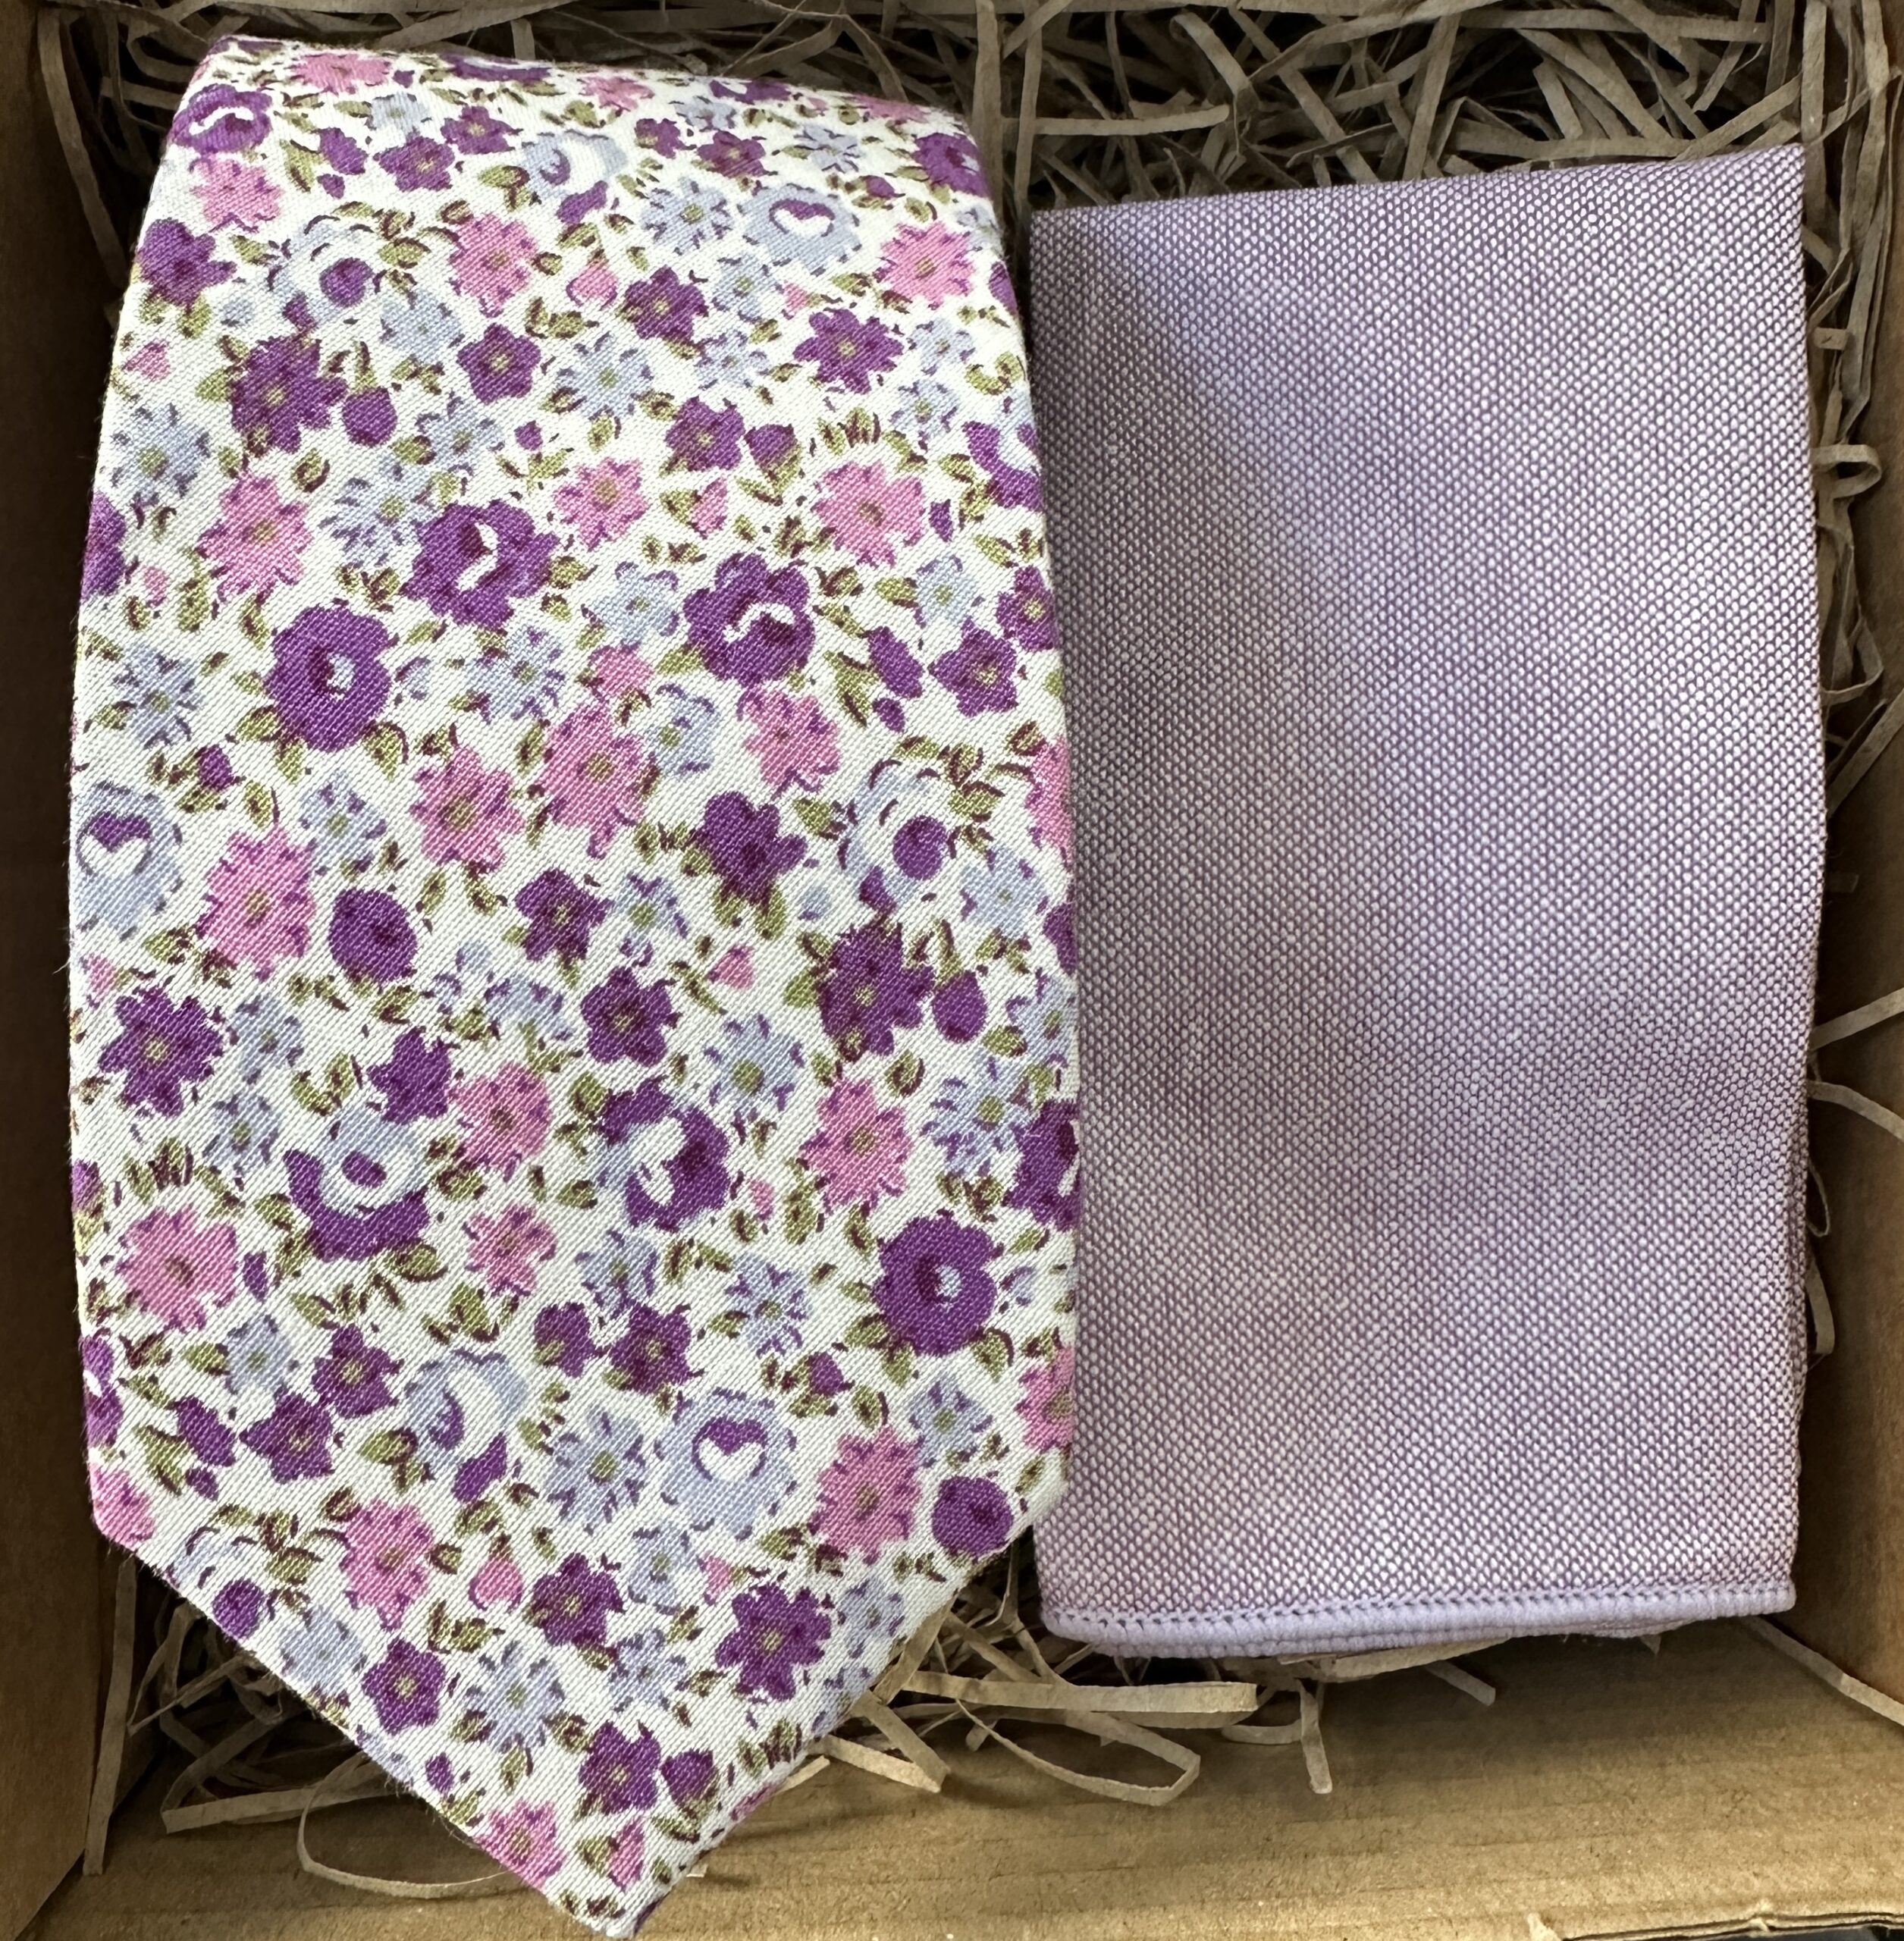 A photo of a lavender floral tie and a lavender cotton pocket square